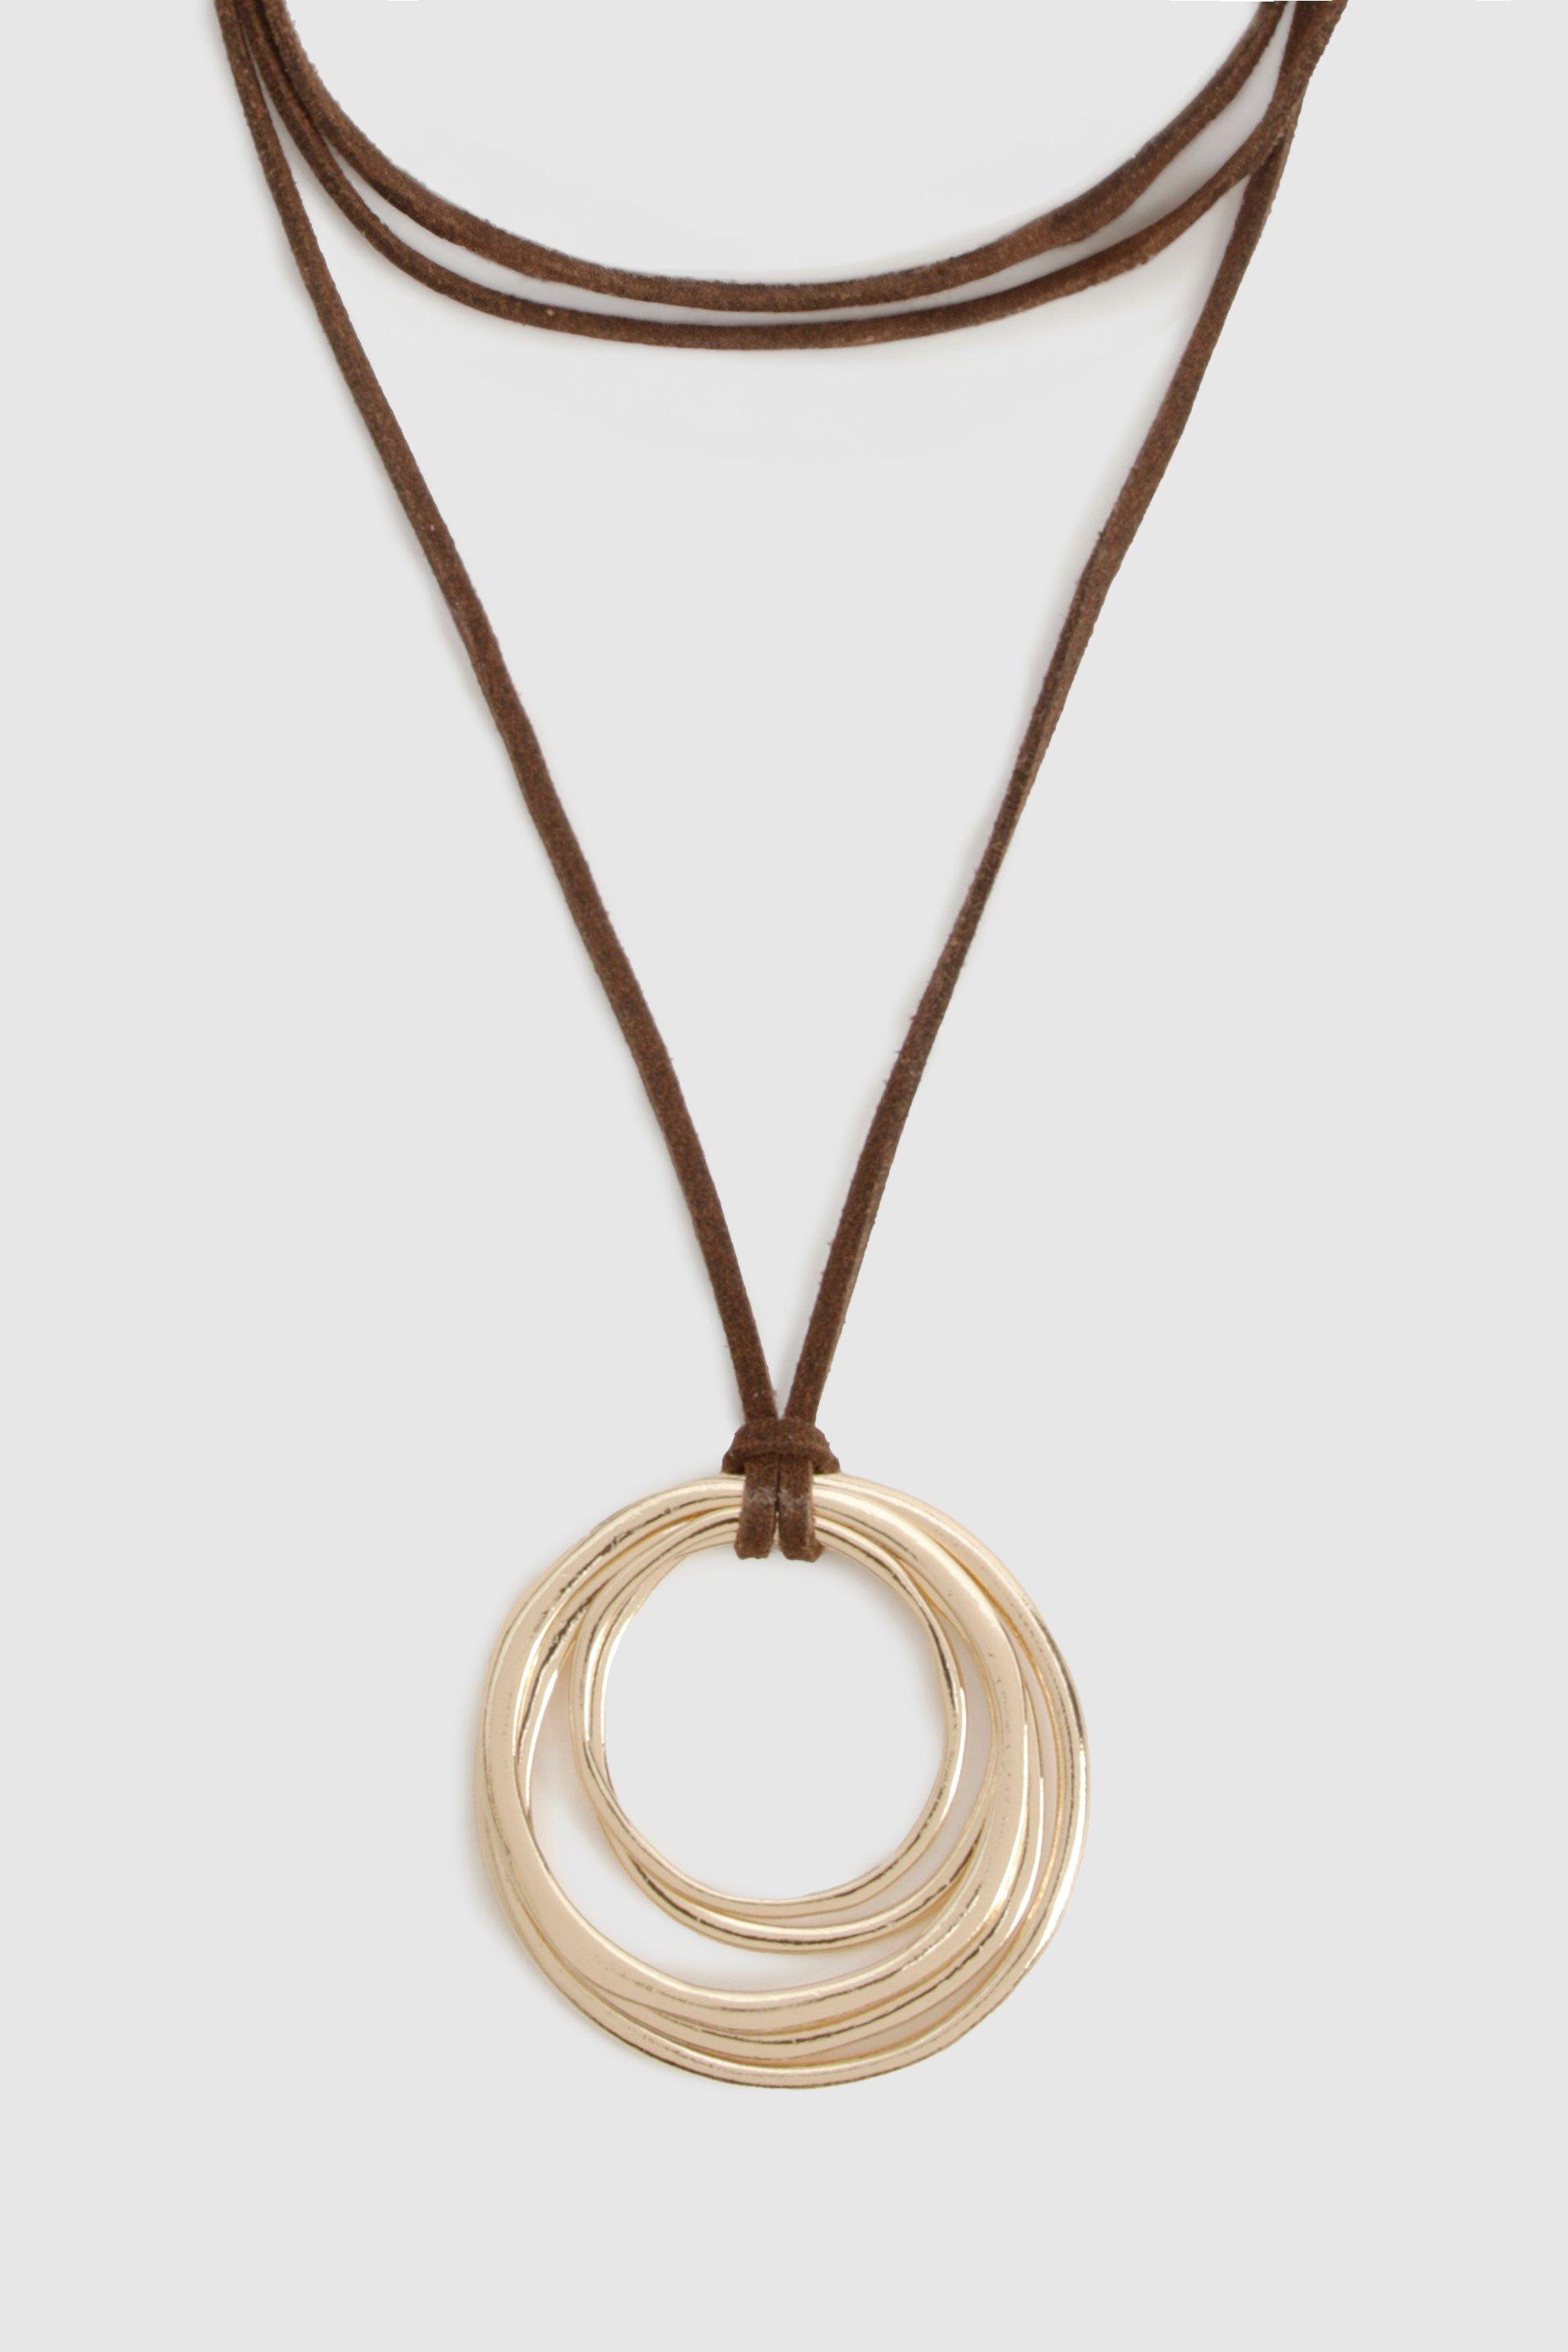 Image of Double Ring Drop Cord Necklace, Brown